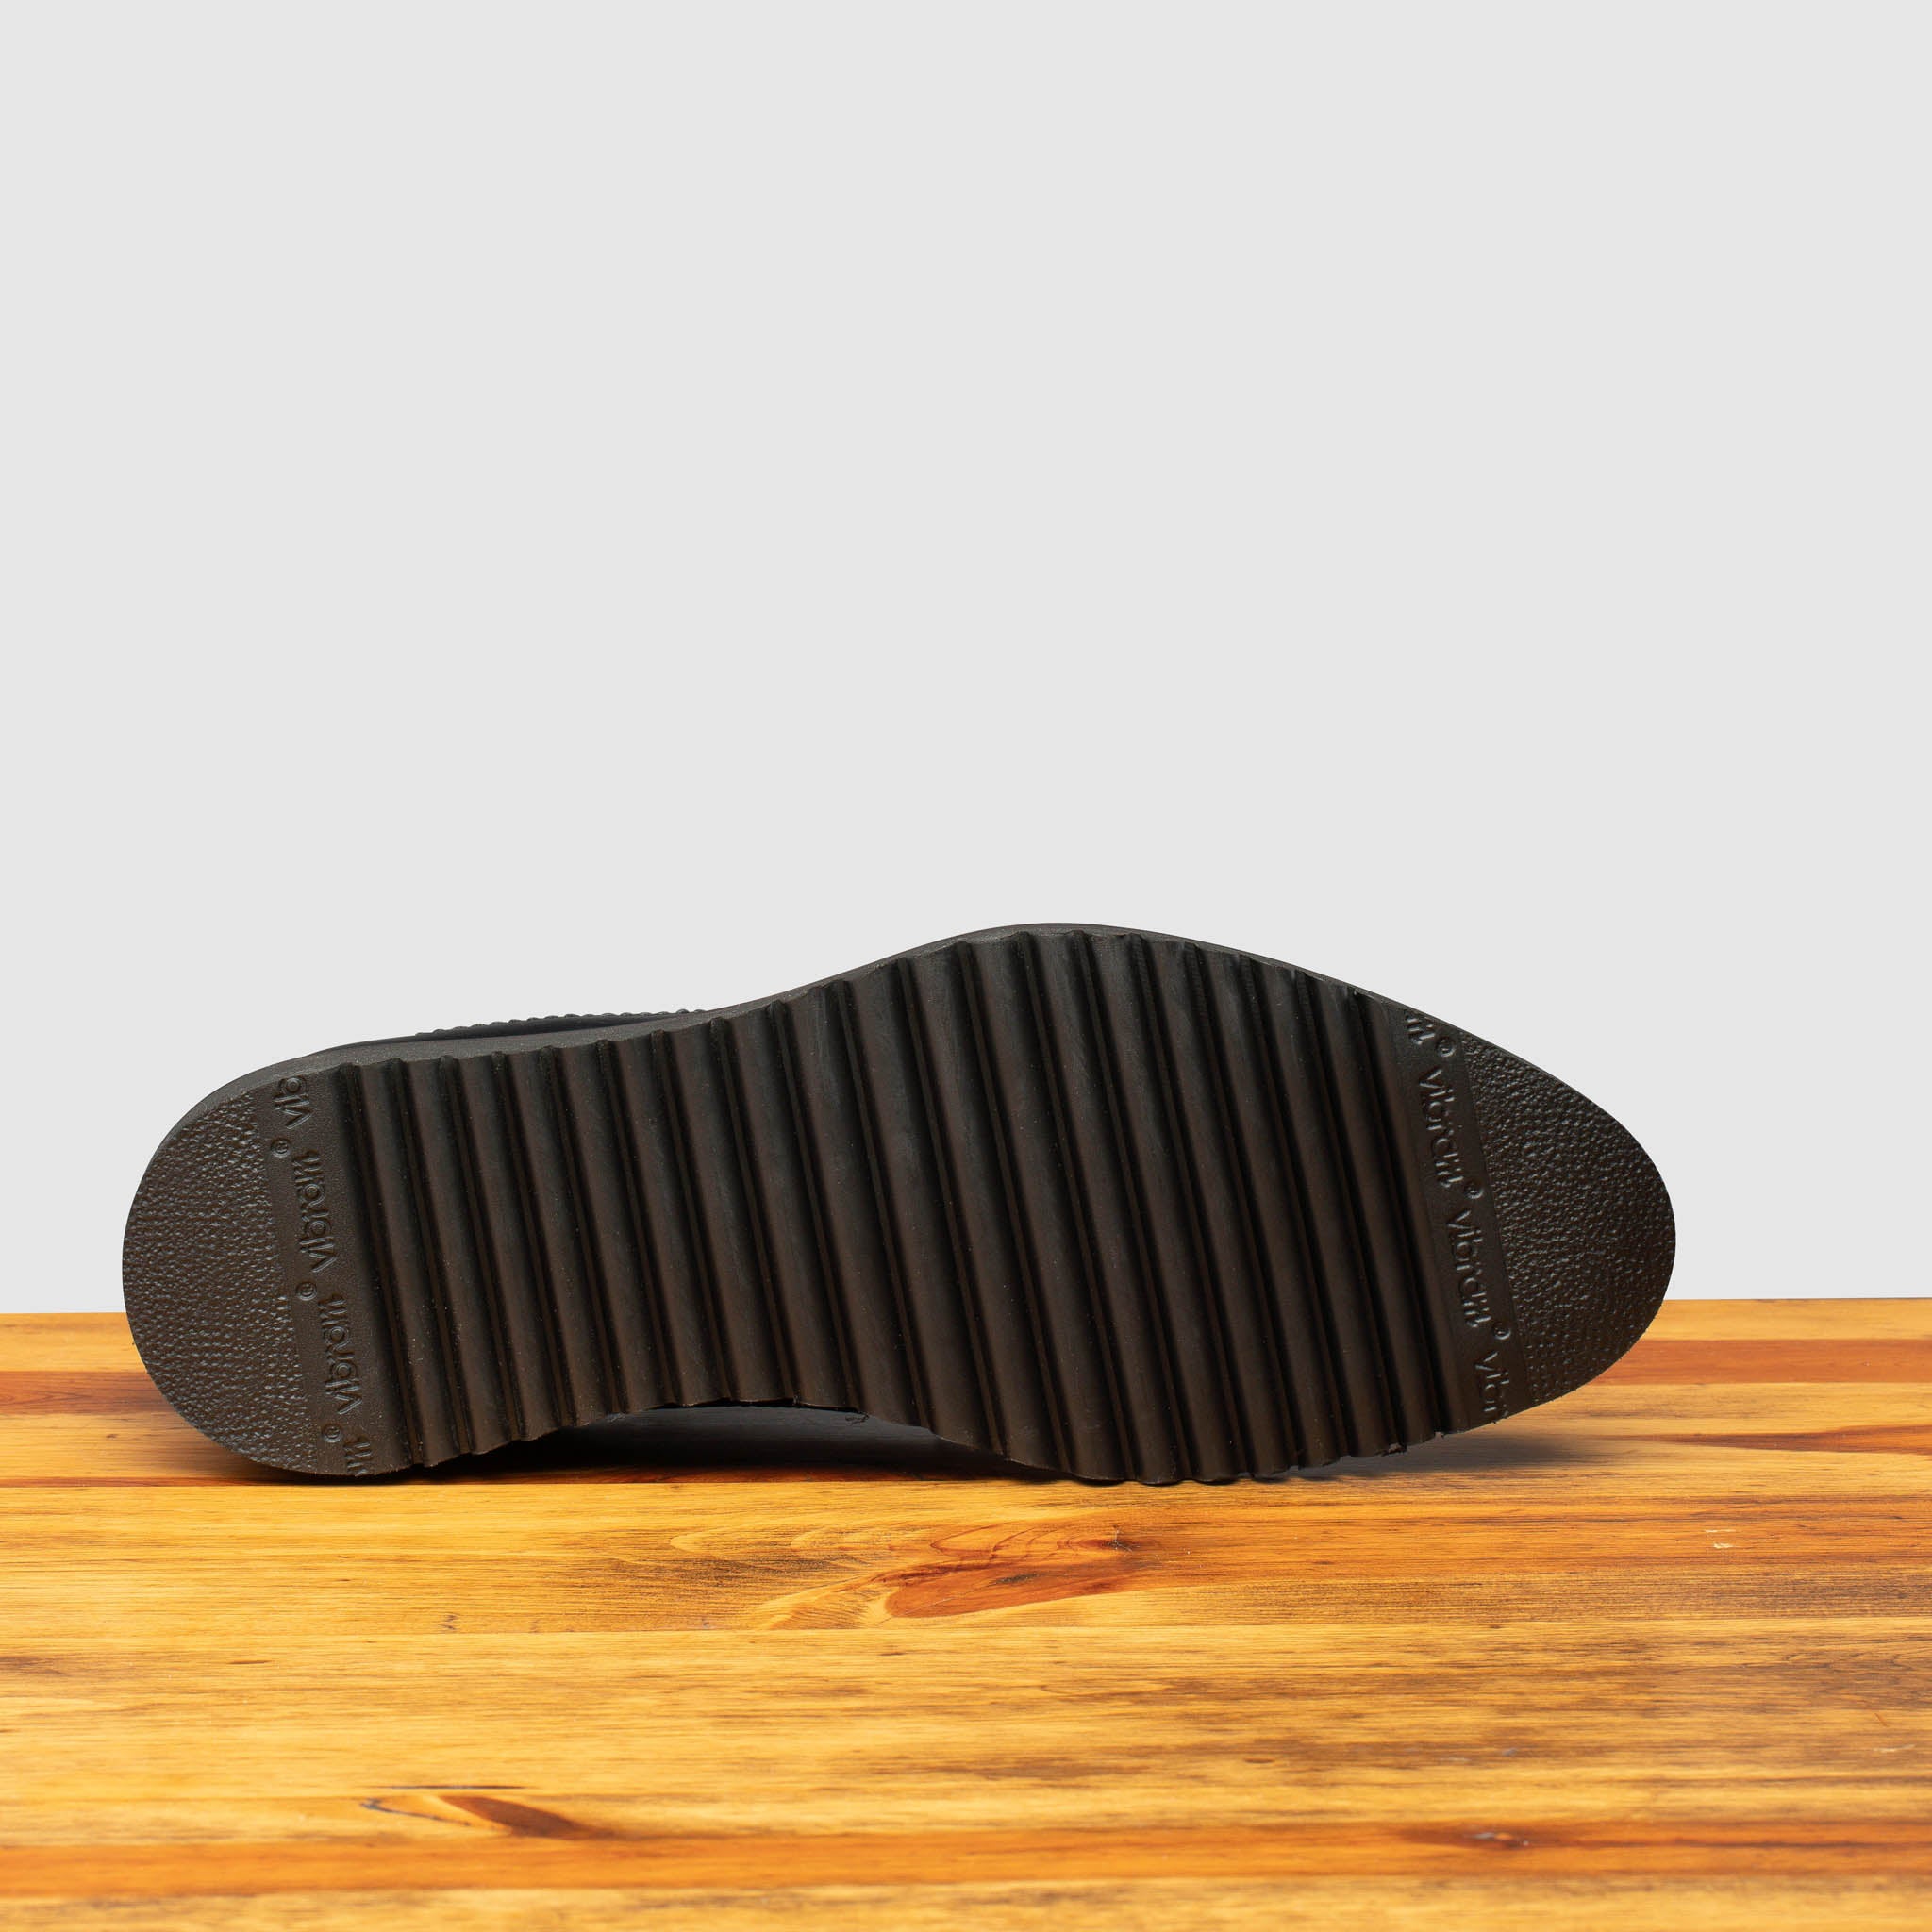 Full Rubber Vibram Outsole of Q400 Calzoleria Toscana Black Agos Blucher on top of a wooden table